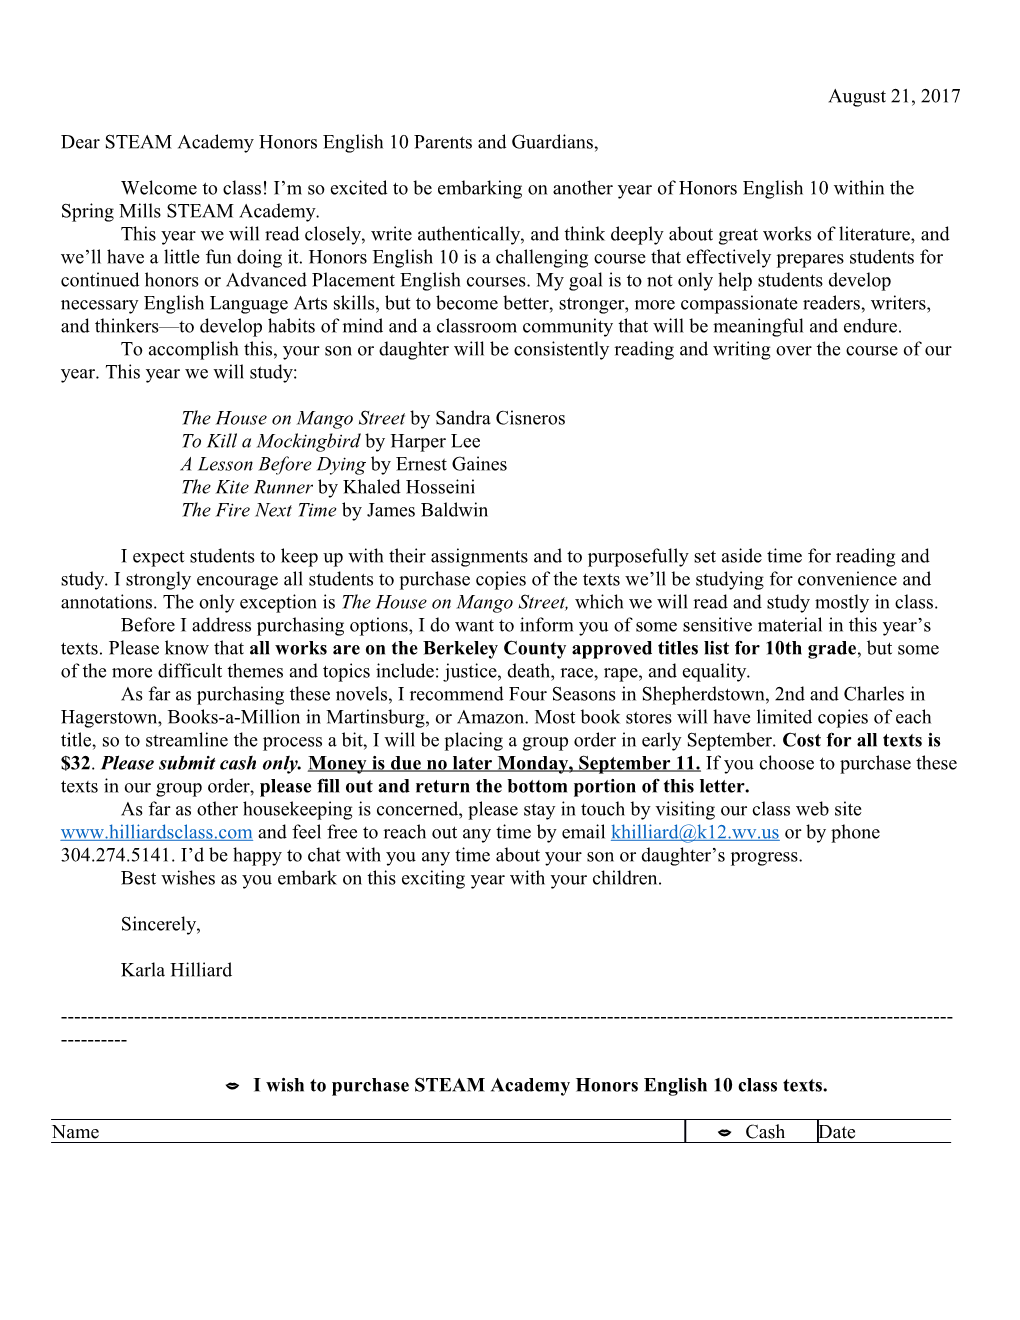 Dear STEAM Academy Honors English 10 Parents and Guardians